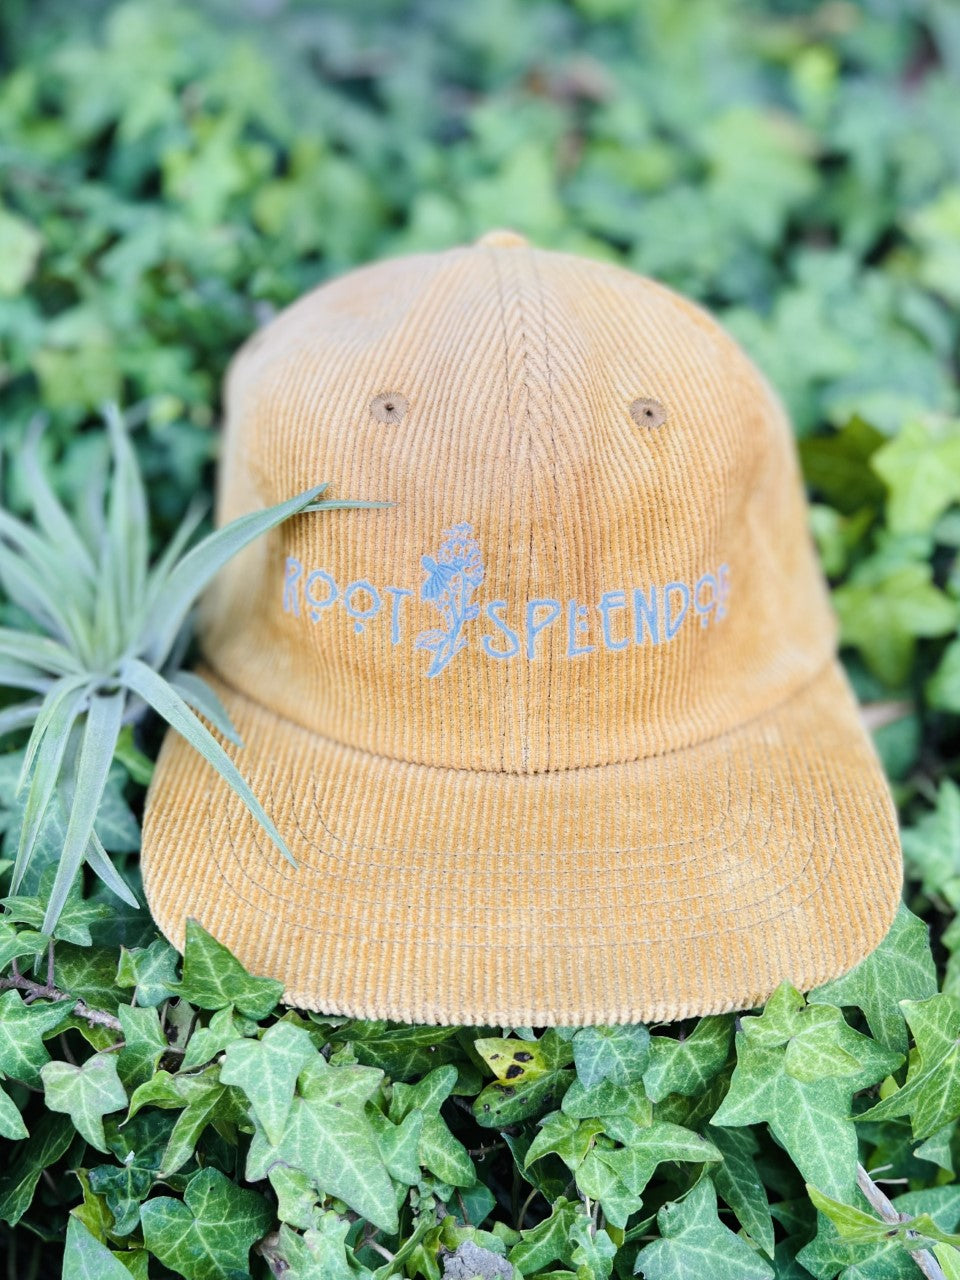 Root and Splendor Embroidered Hat